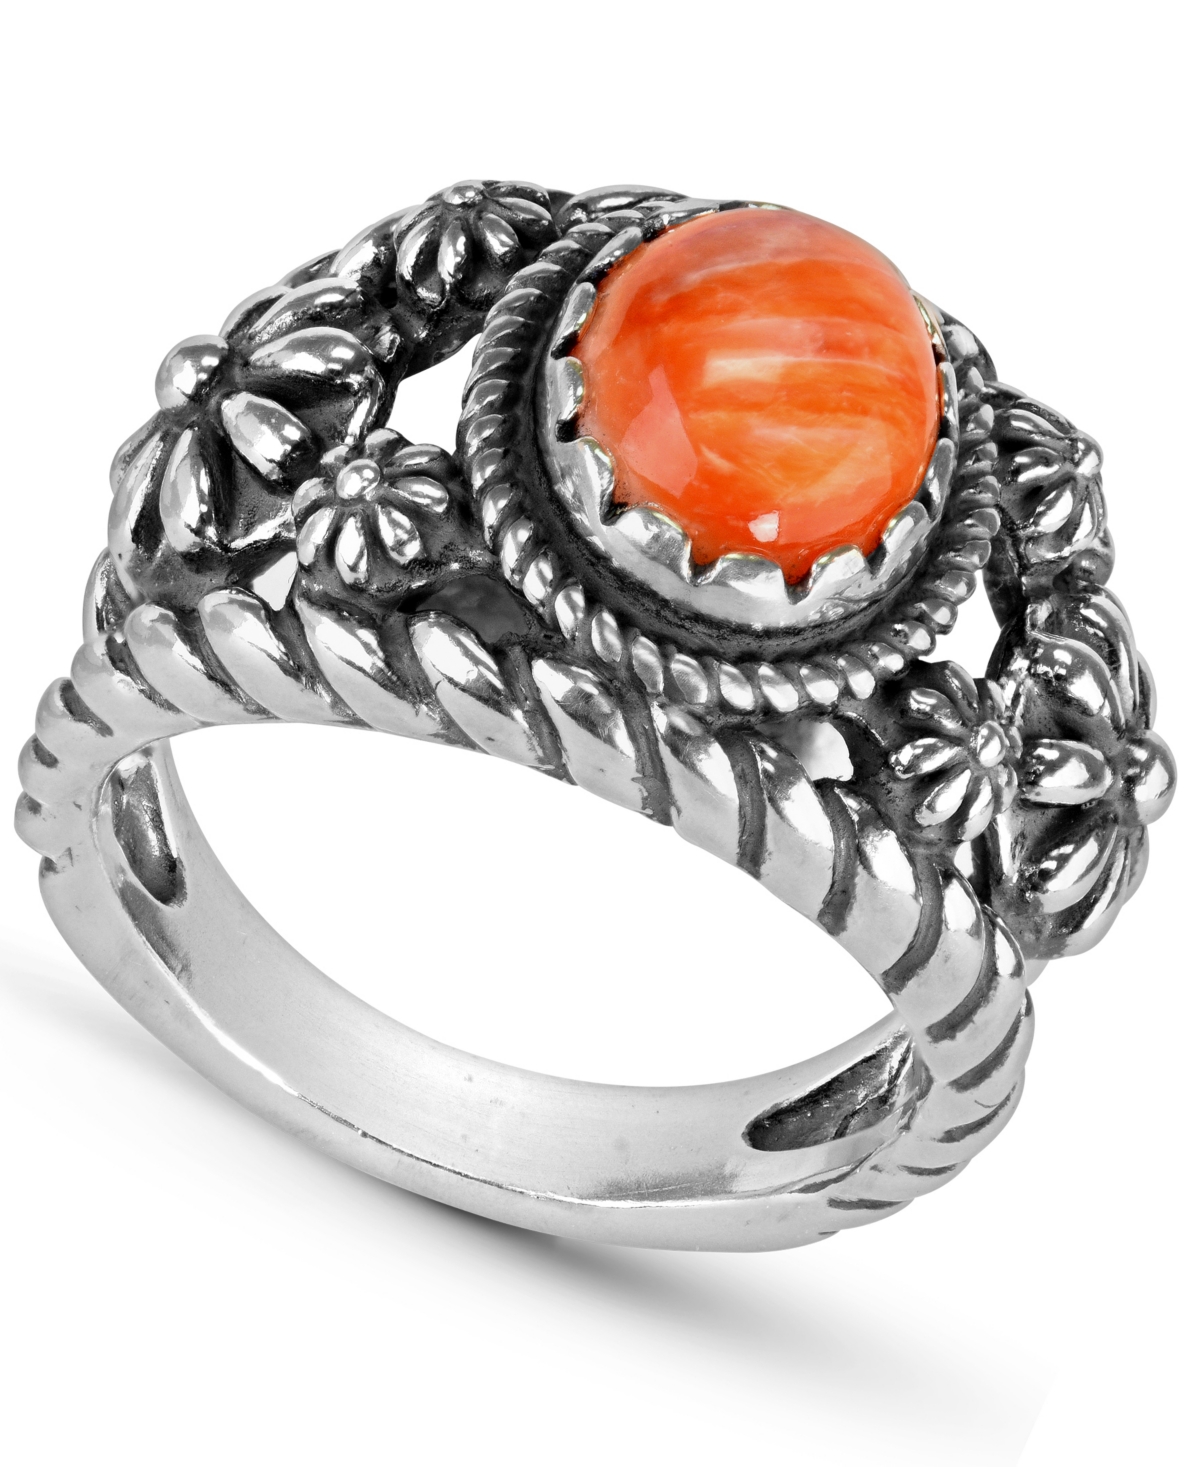 American West by Carolyn Pollack Sterling Silver Gemstone Ring in Charoite, Orange Spiny Oyster or Purple Spiny Oyster